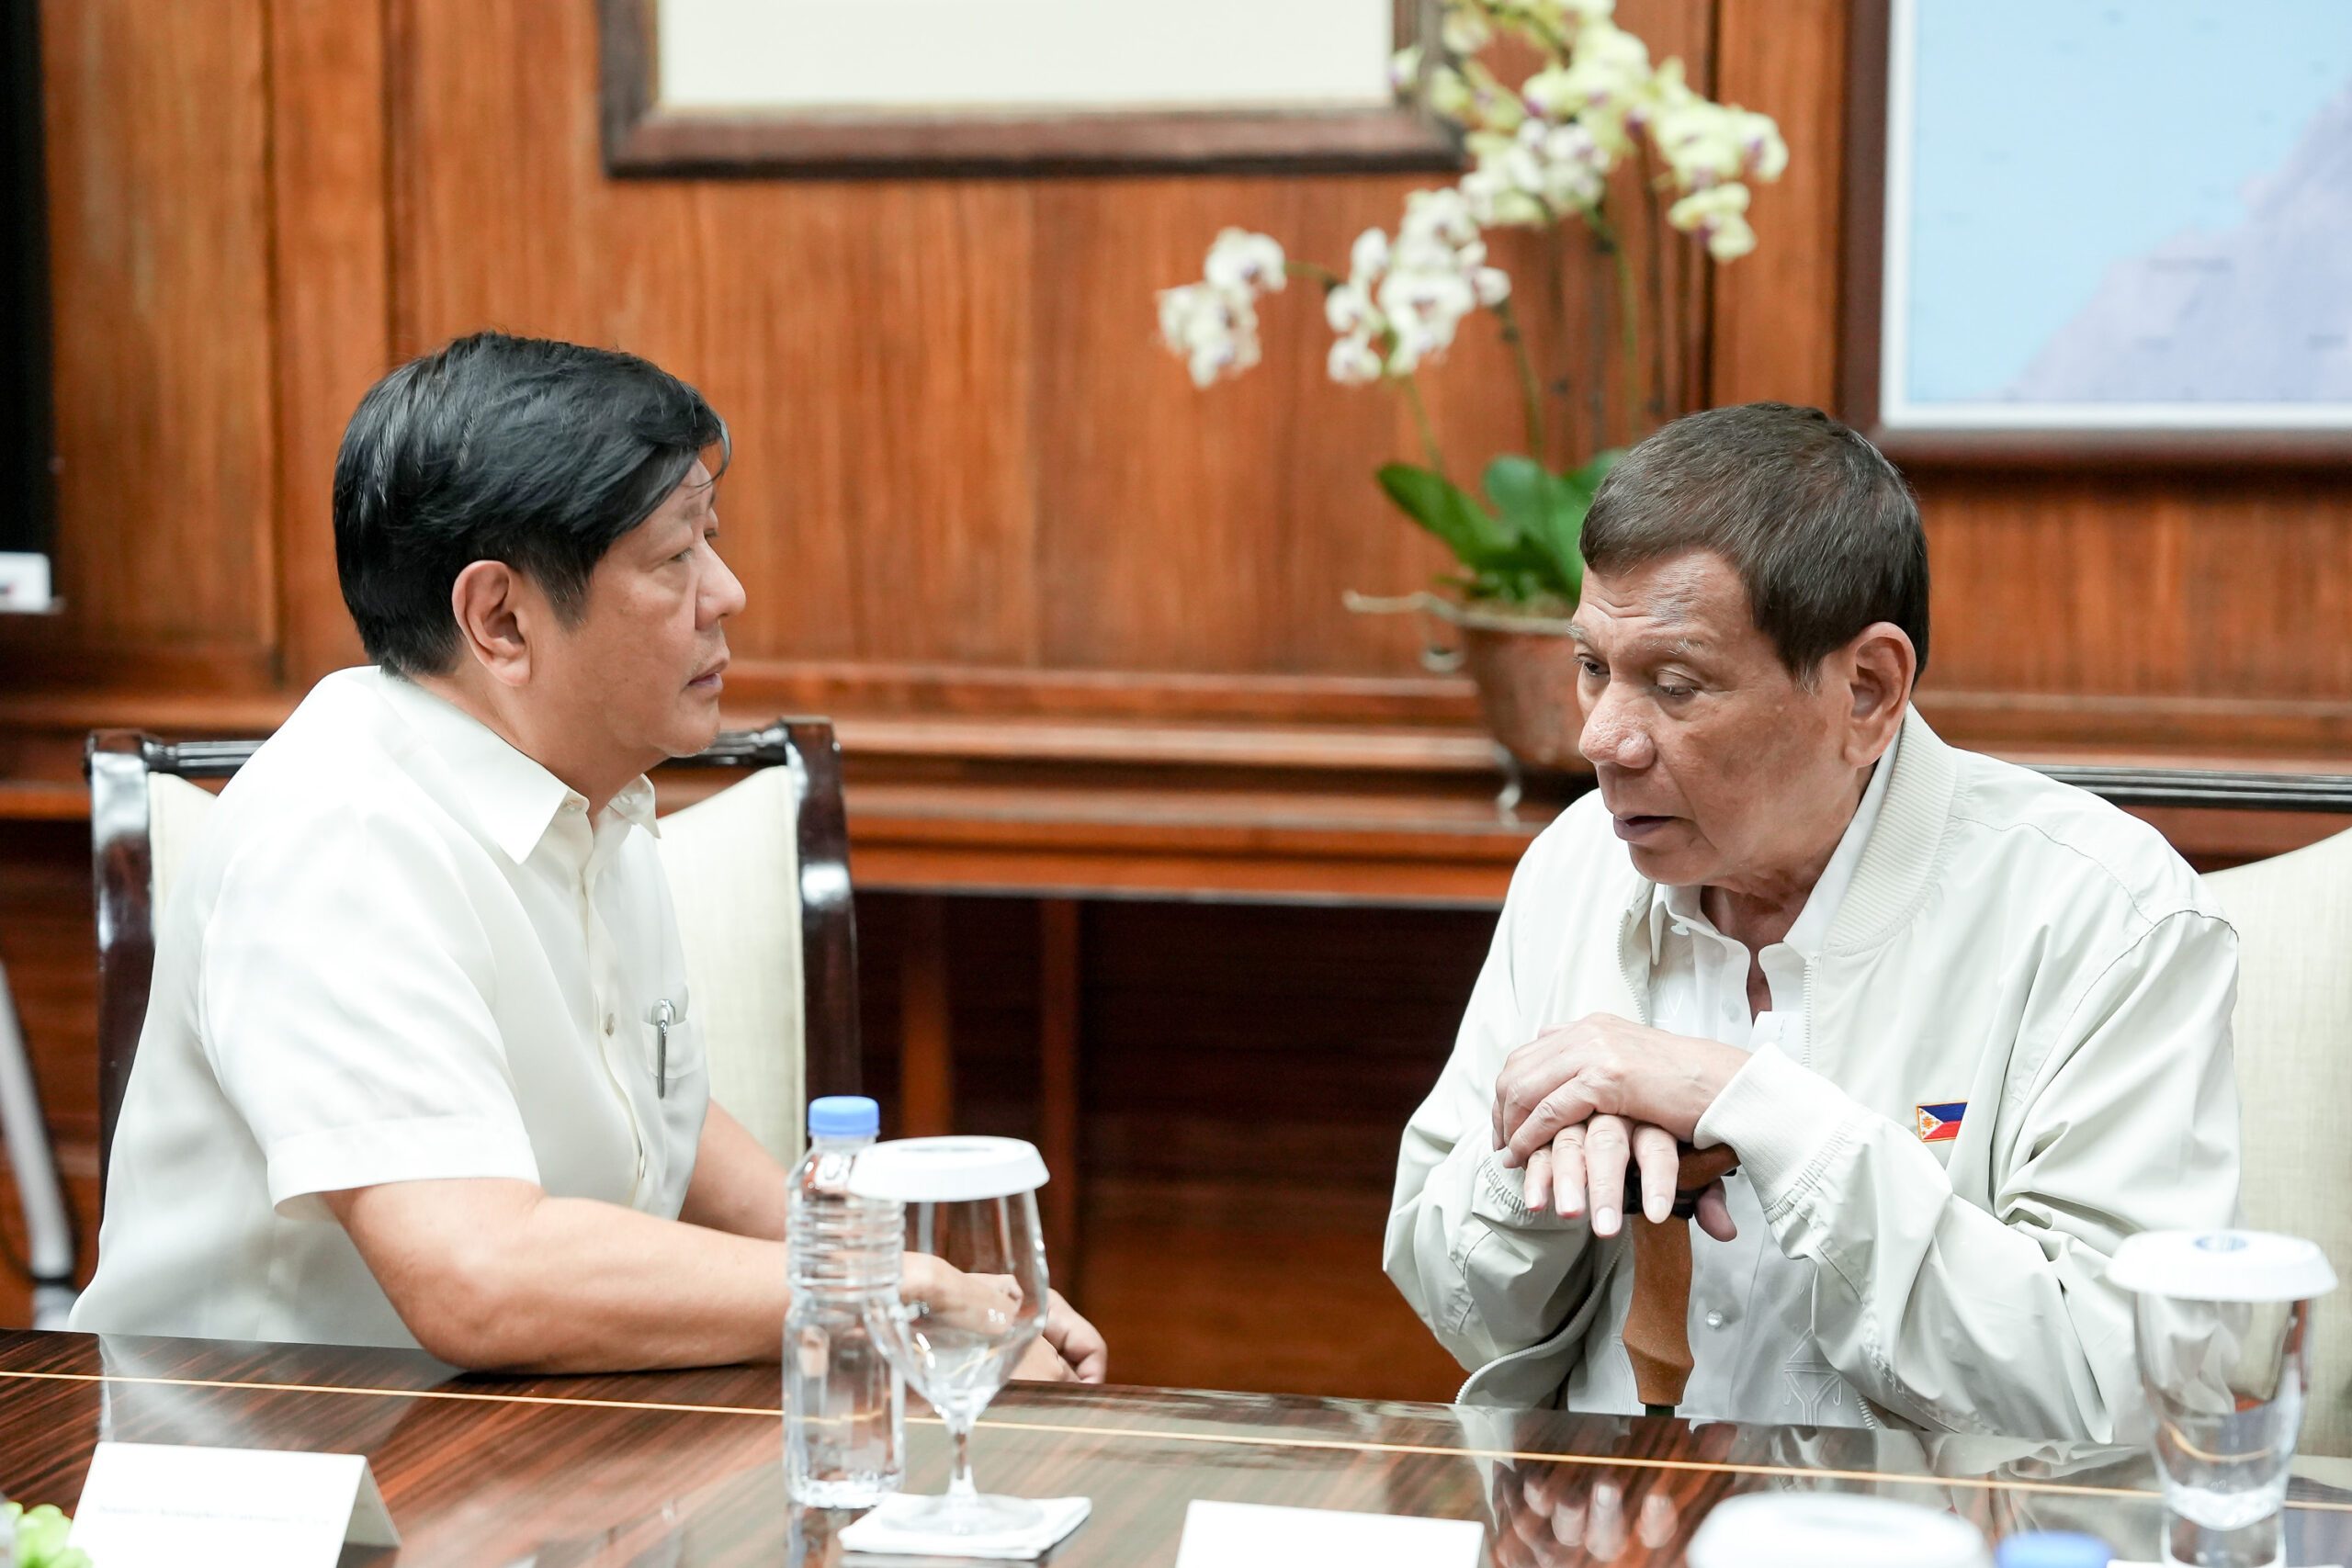 Tit for tat: Marcos blames Duterte’s use of fentanyl for foul-mouthed tirade